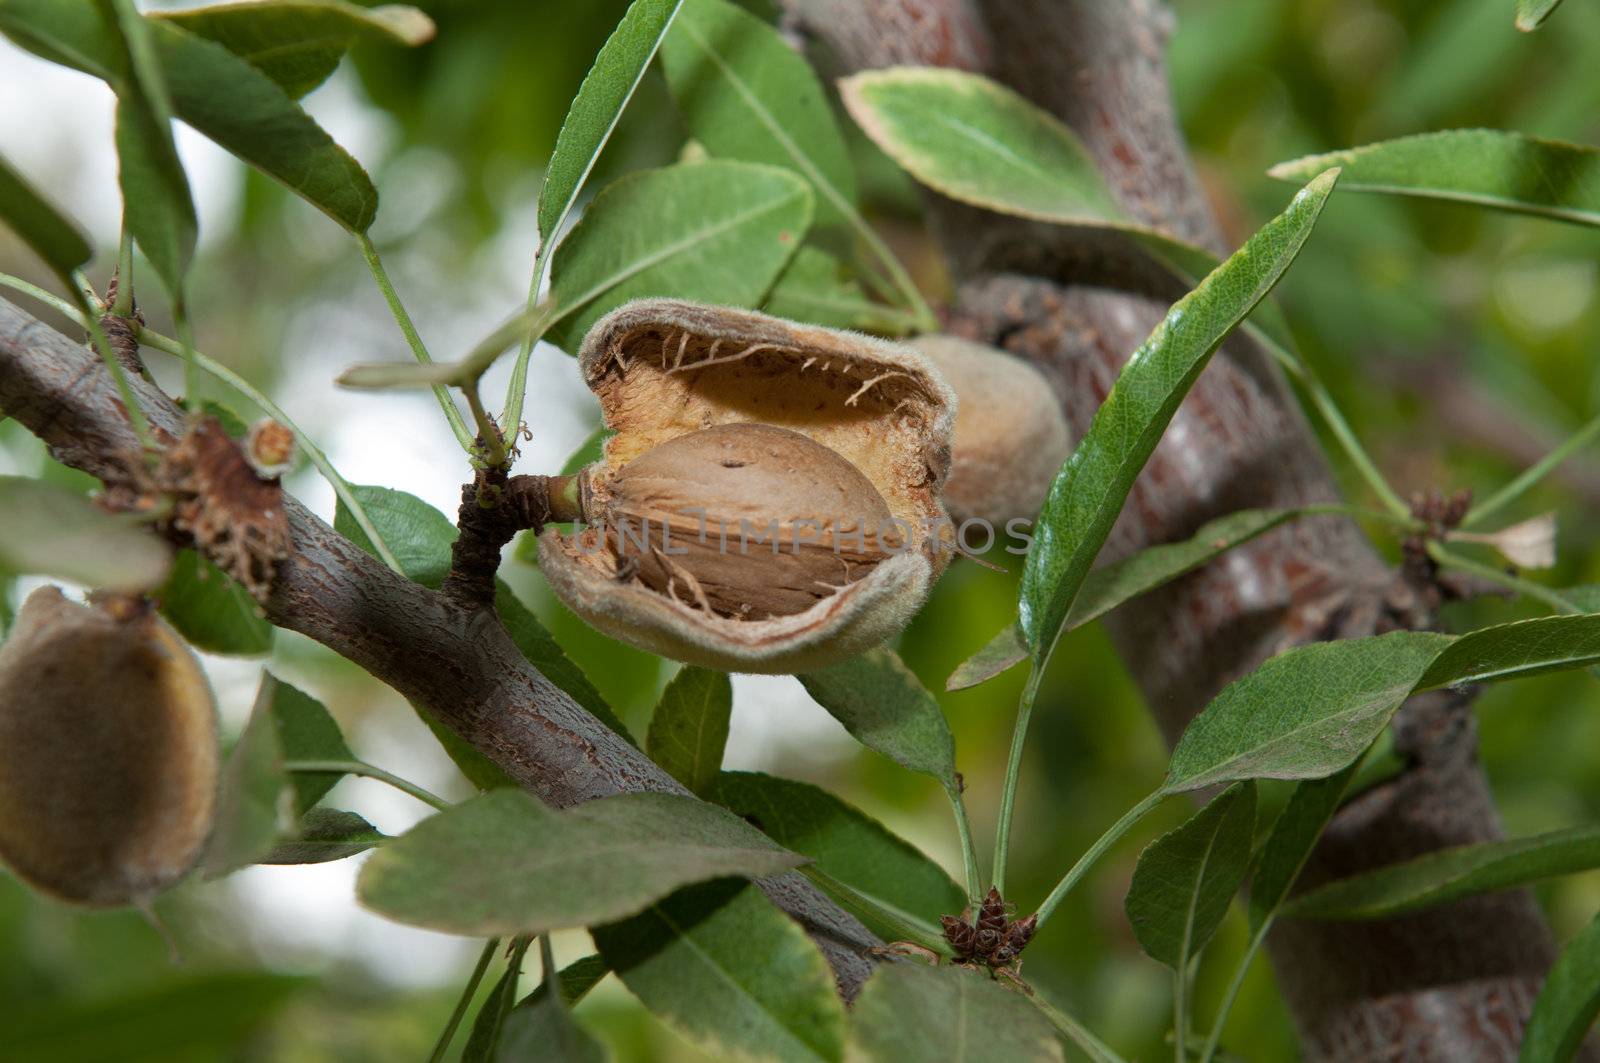 Almond in its tree